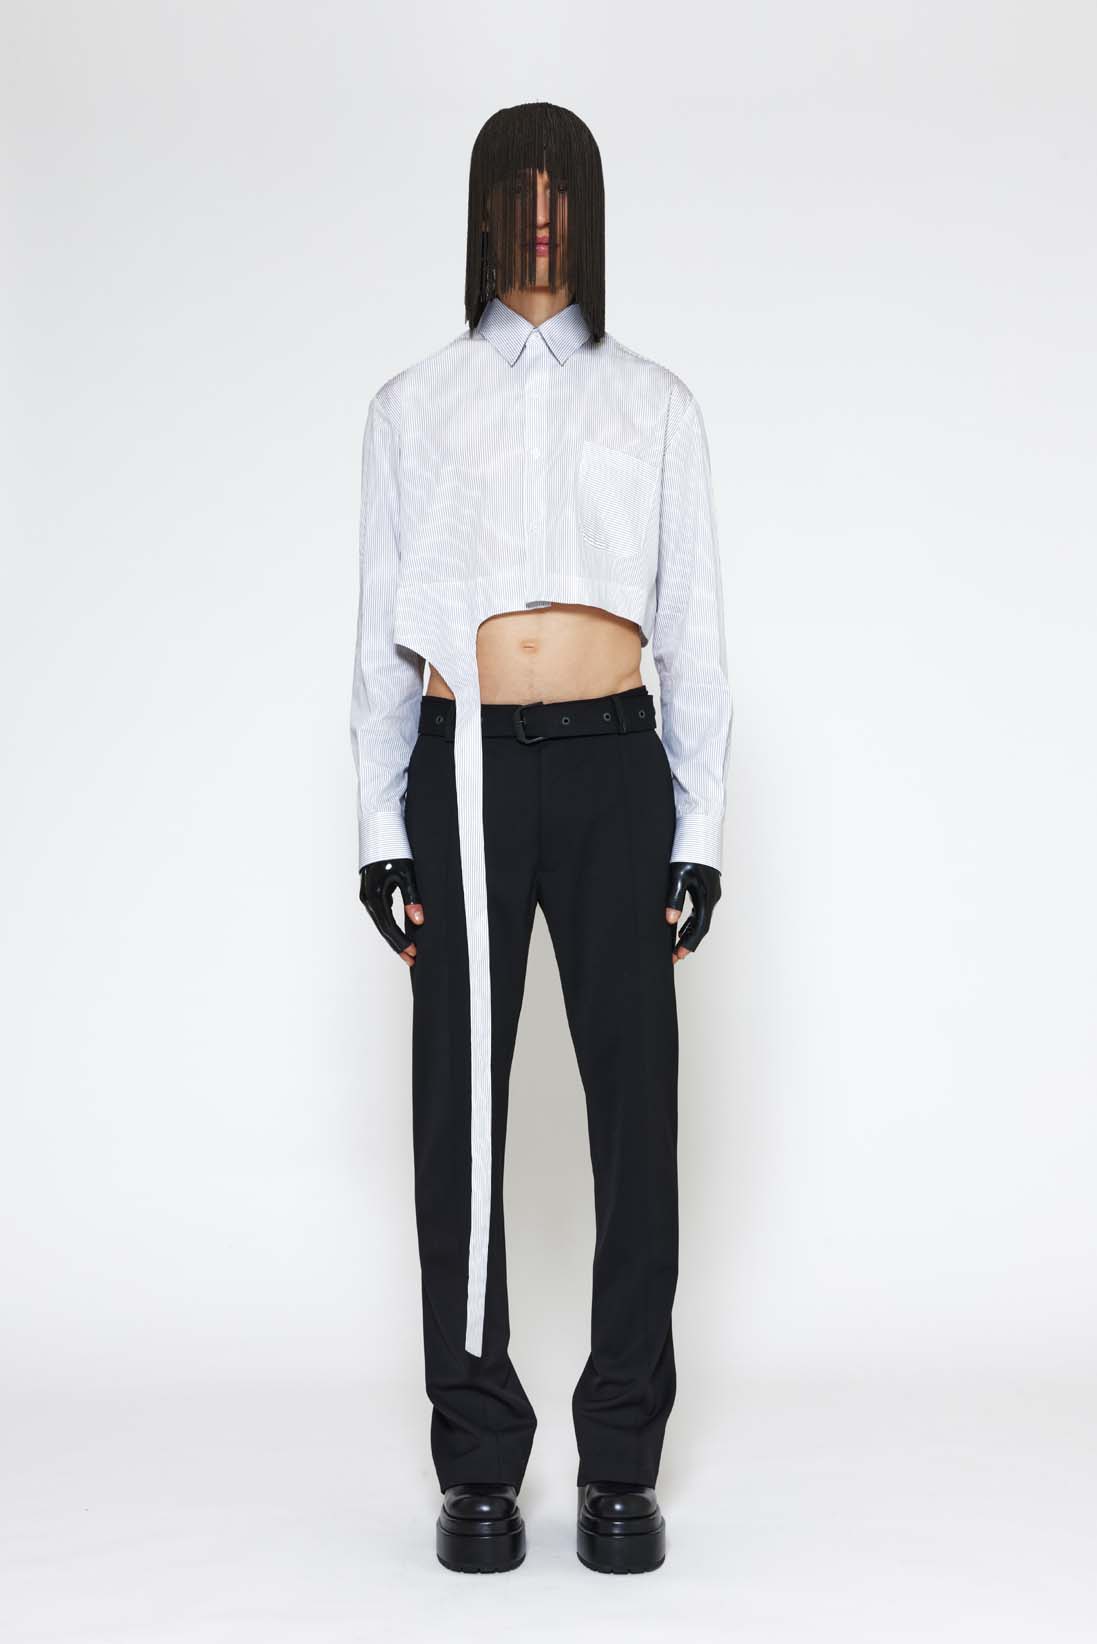 Candice  -   Cropped men's shirt with long drawstring